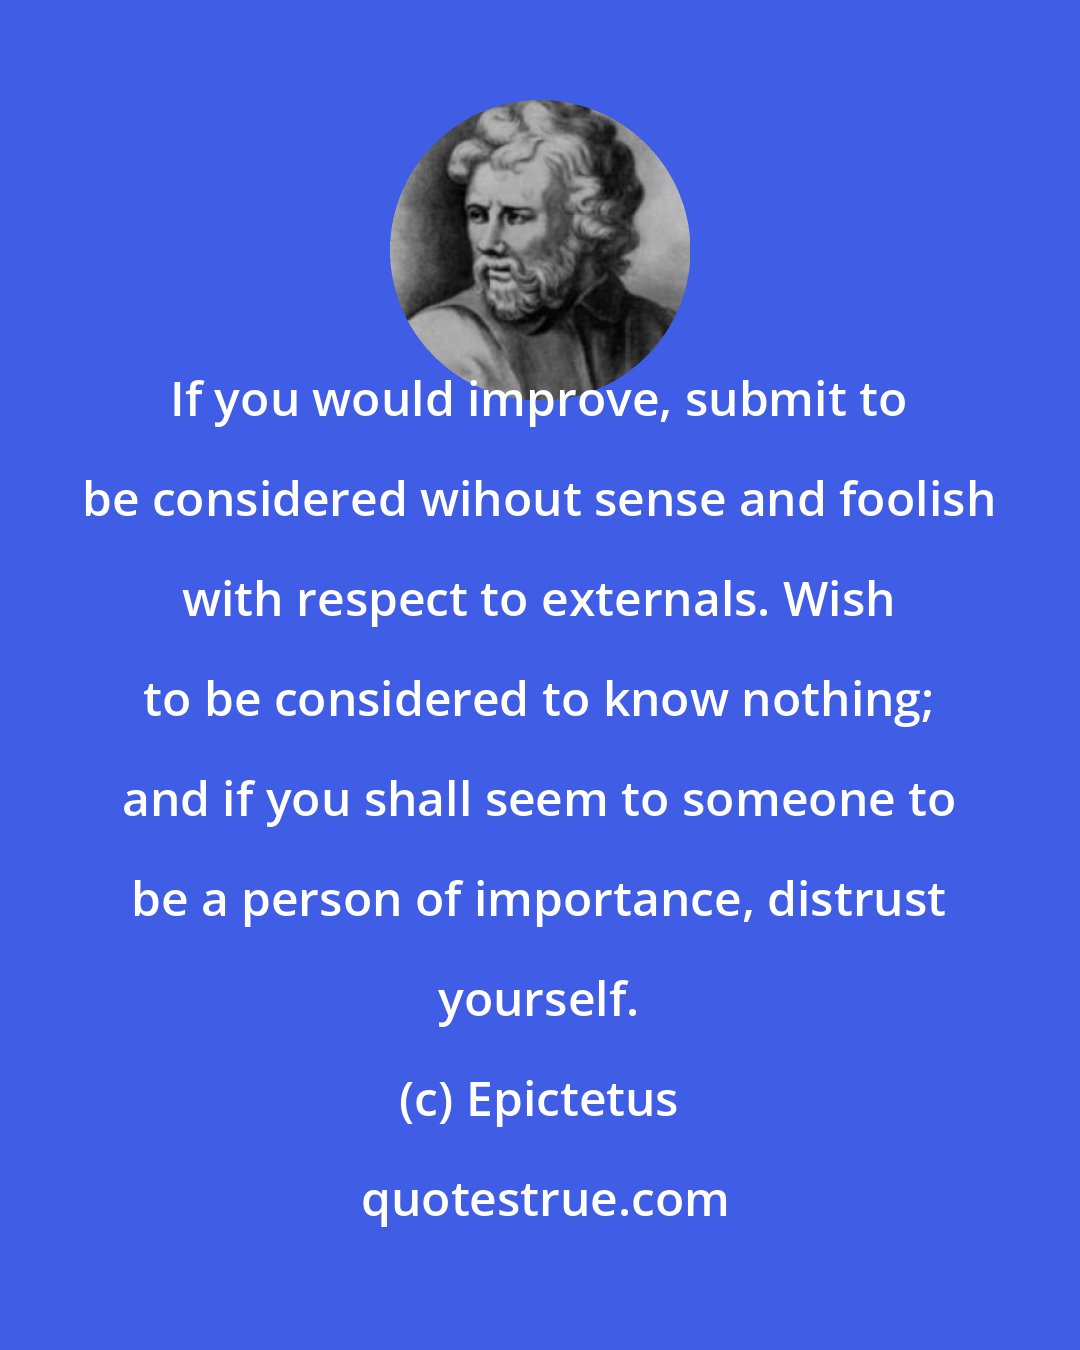 Epictetus: If you would improve, submit to be considered wihout sense and foolish with respect to externals. Wish to be considered to know nothing; and if you shall seem to someone to be a person of importance, distrust yourself.